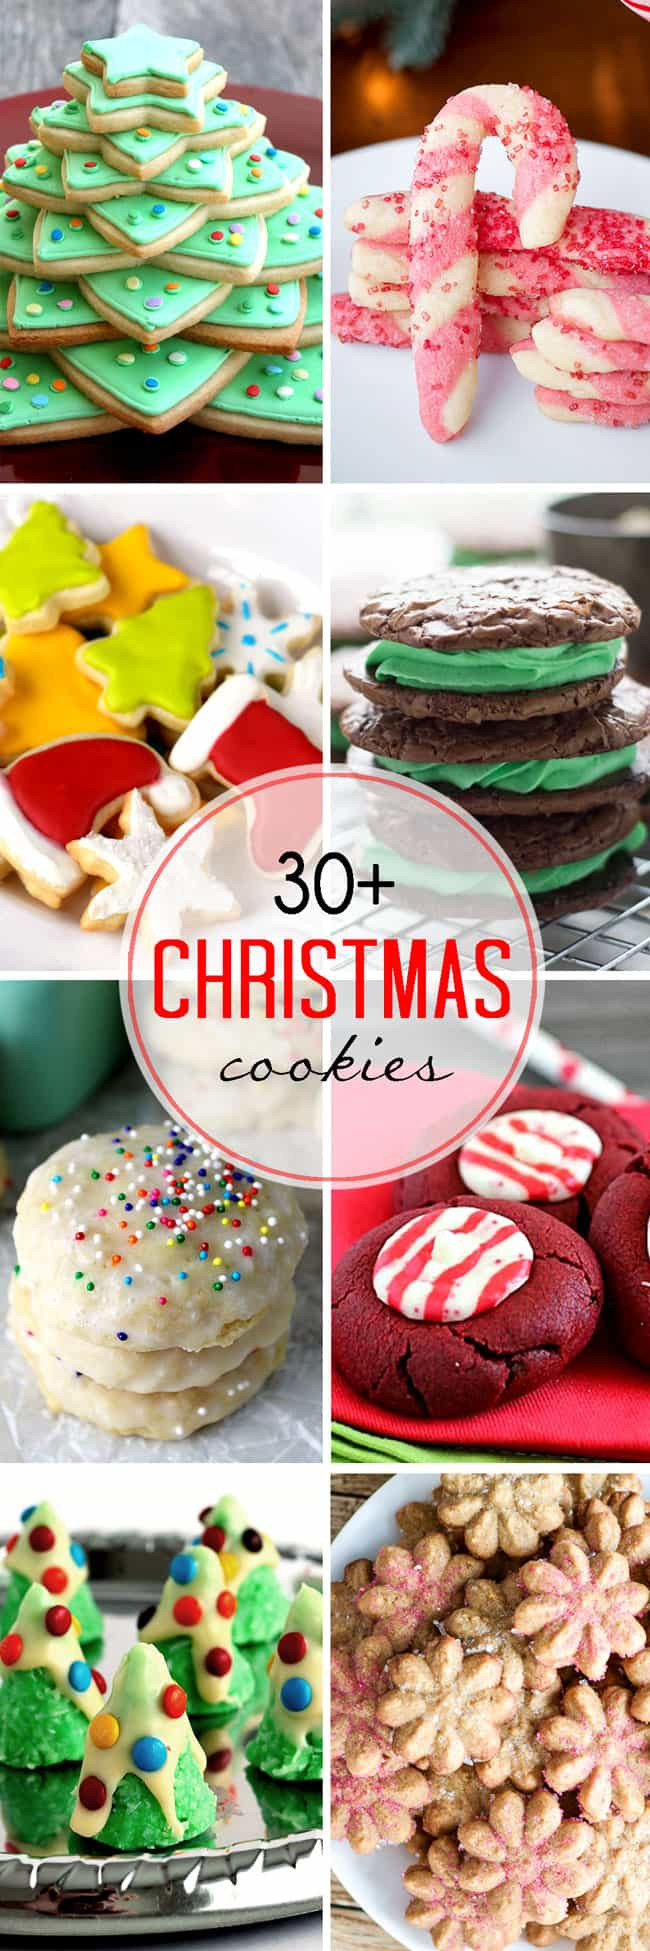 Christmas Cookies Pinterest
 30 Christmas Cookies for your holiday baking